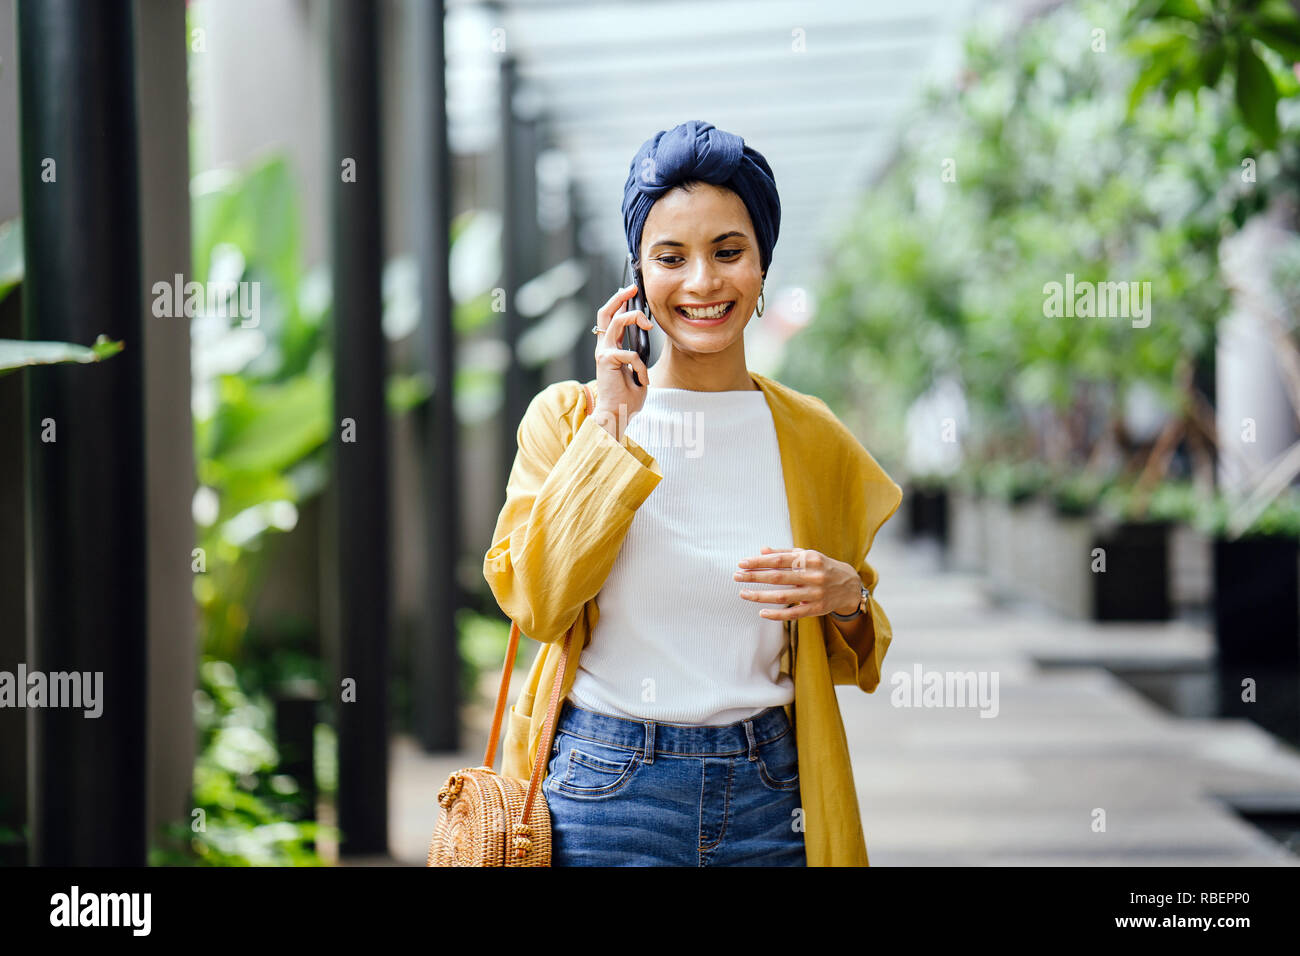 A young and beautiful Middle Eastern woman in a turban hijab is smiling as she talks on her smartphone on the street during the day. Stock Photo